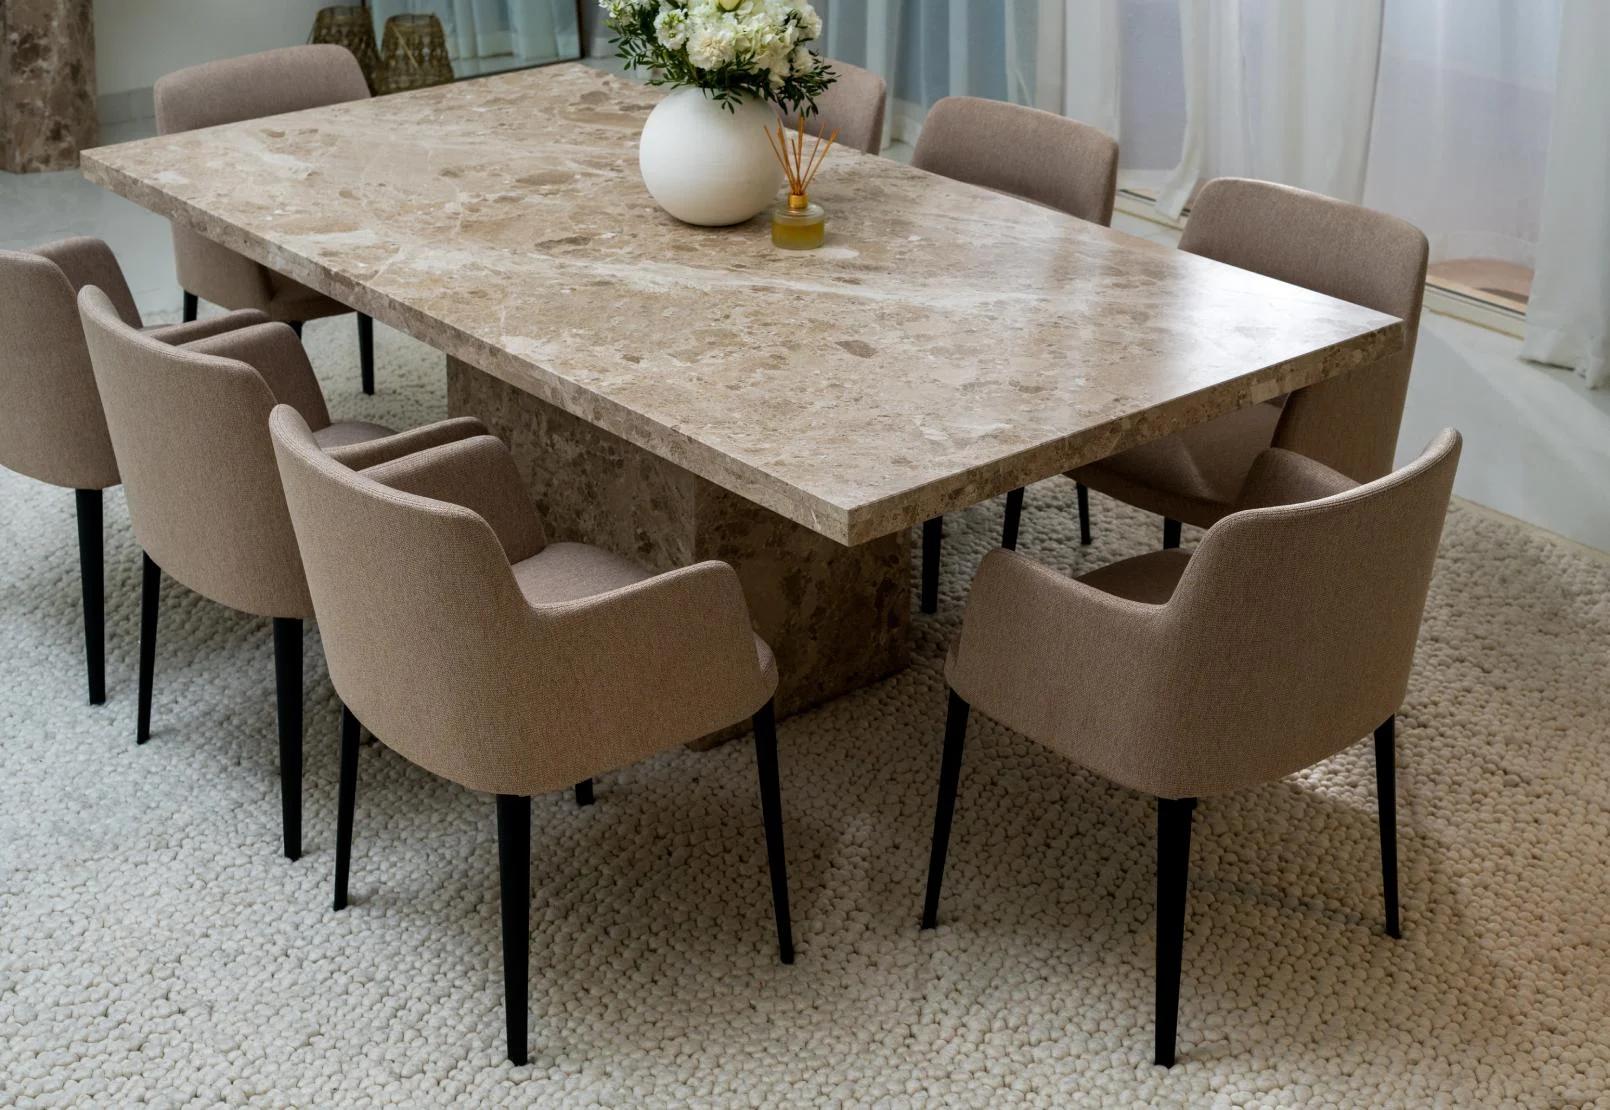 Dining Tables That Are Perfect For Hosting Family Iftars This Ramadan